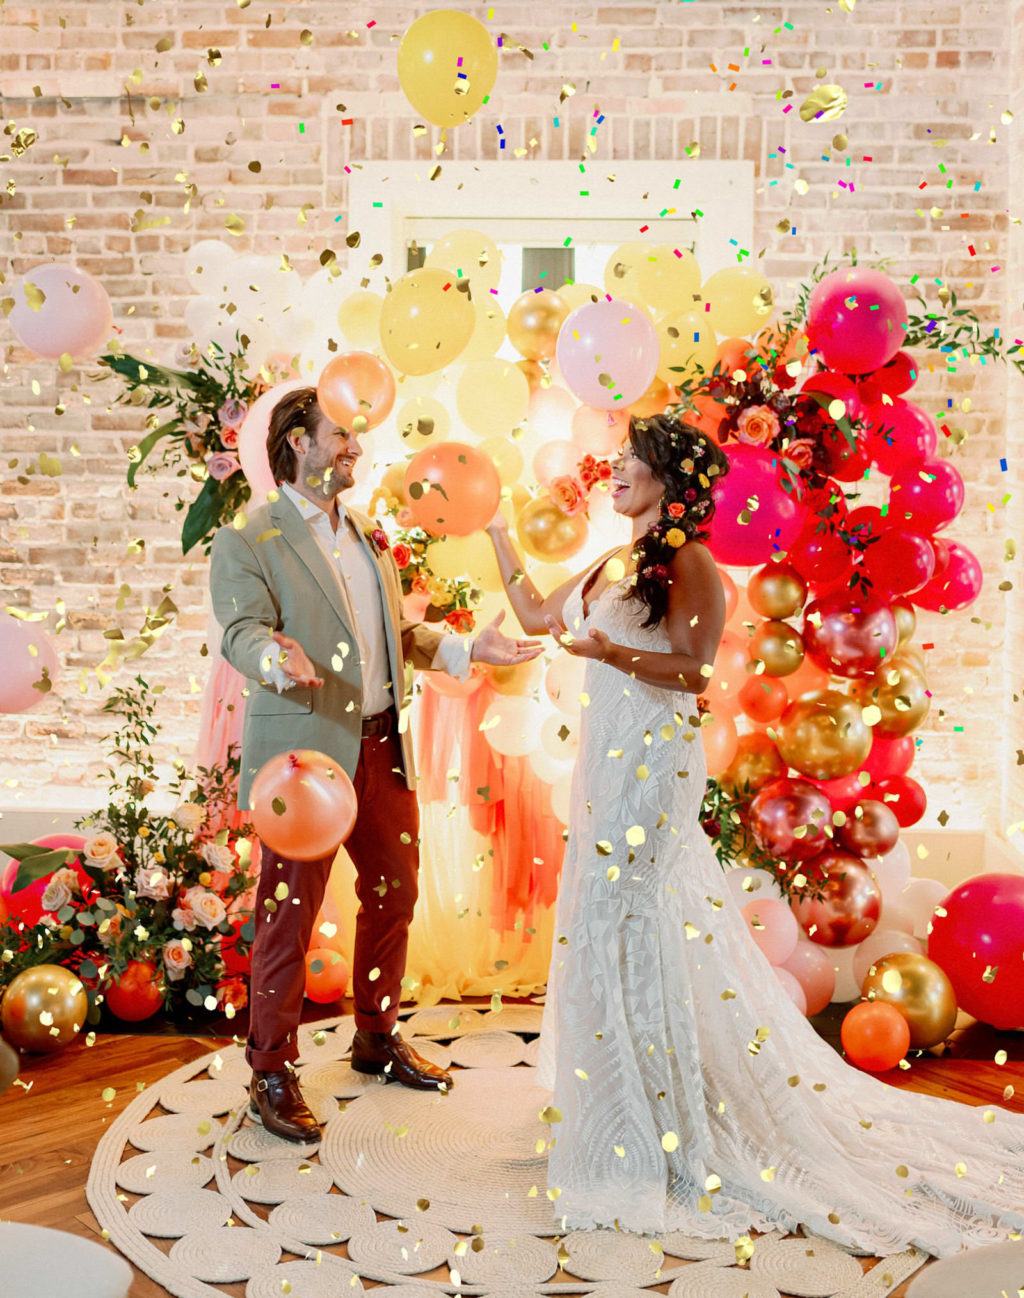 Whimsical and Colorful Bride and Groom Gold Confetti Photo with Orange, Pink, Yellow and Gold Balloon and Fringe Ceremony Backdrop | Tampa Bay Wedding Photographer Dewitt for Love | St. Pete Modern Industrial Wedding Venue Red Mesa Events